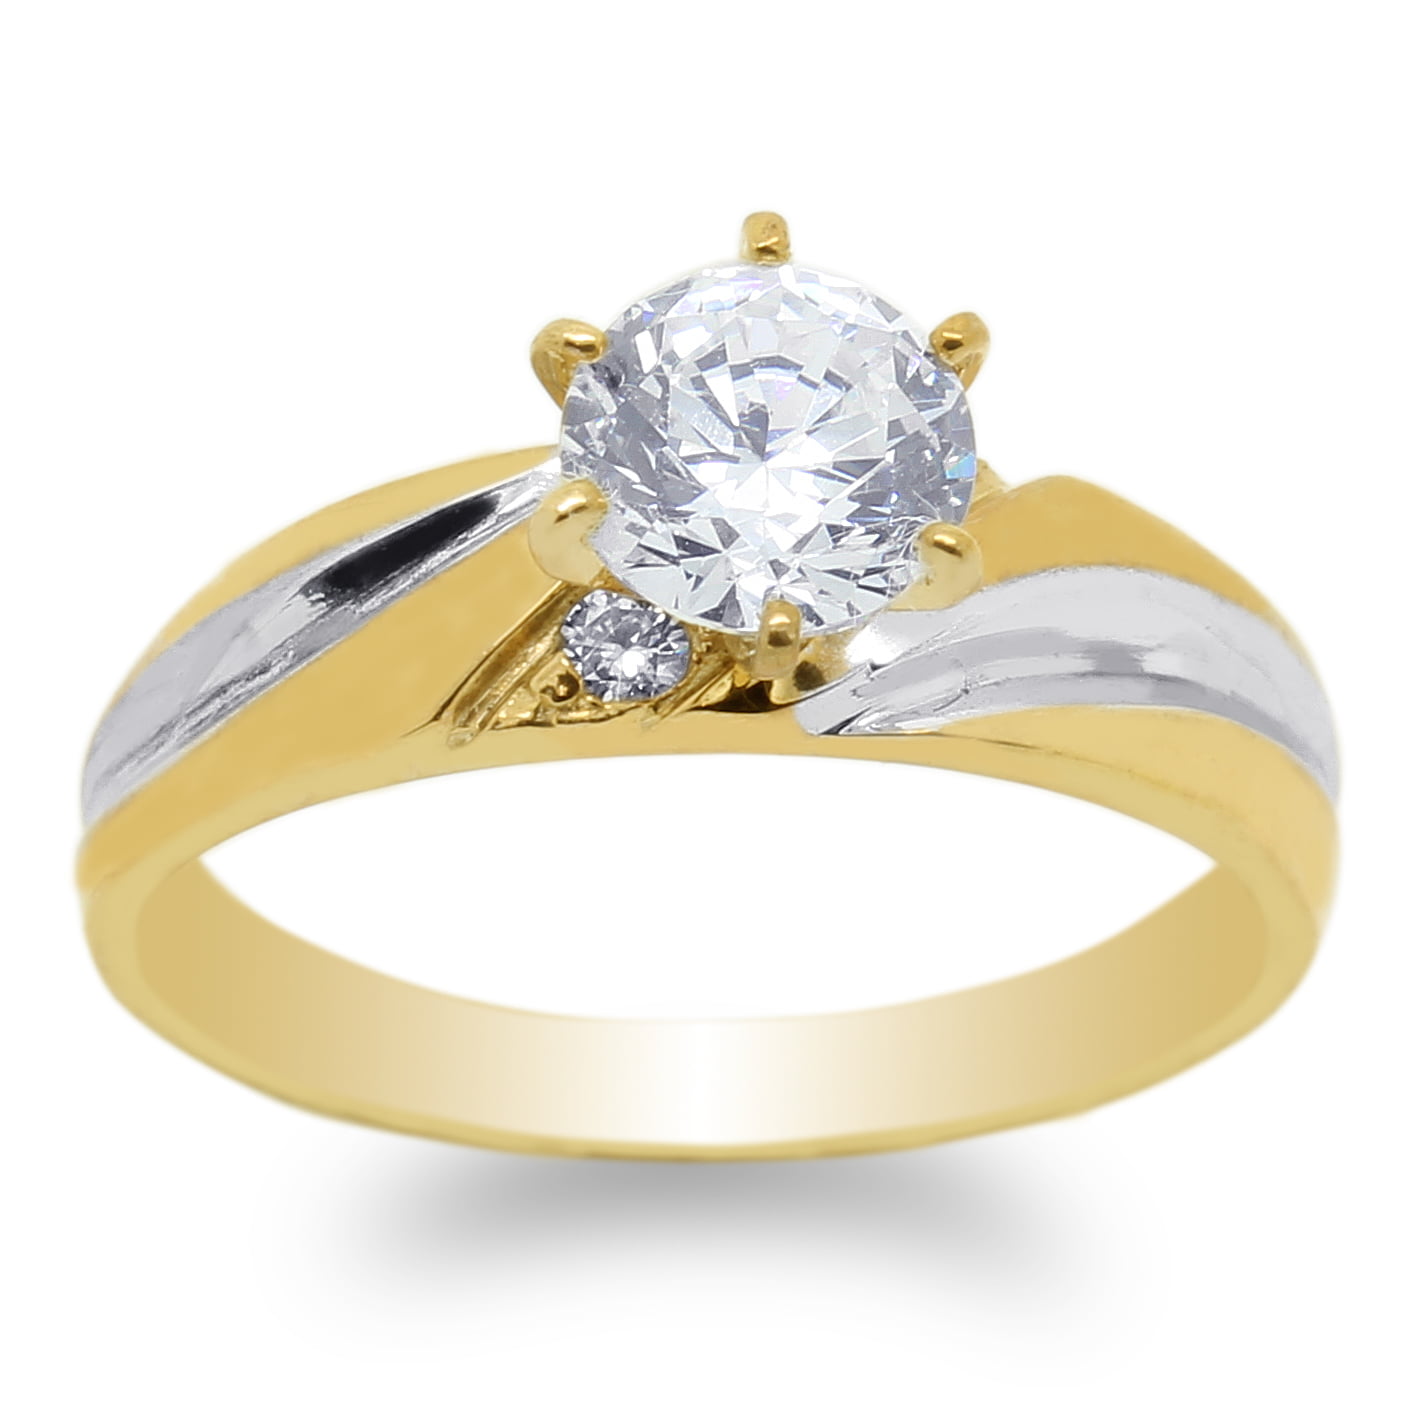 9ct Yellow Gold Solid Ladies Solitaire CZ Ring 10mm *All Sizes Available* NEW